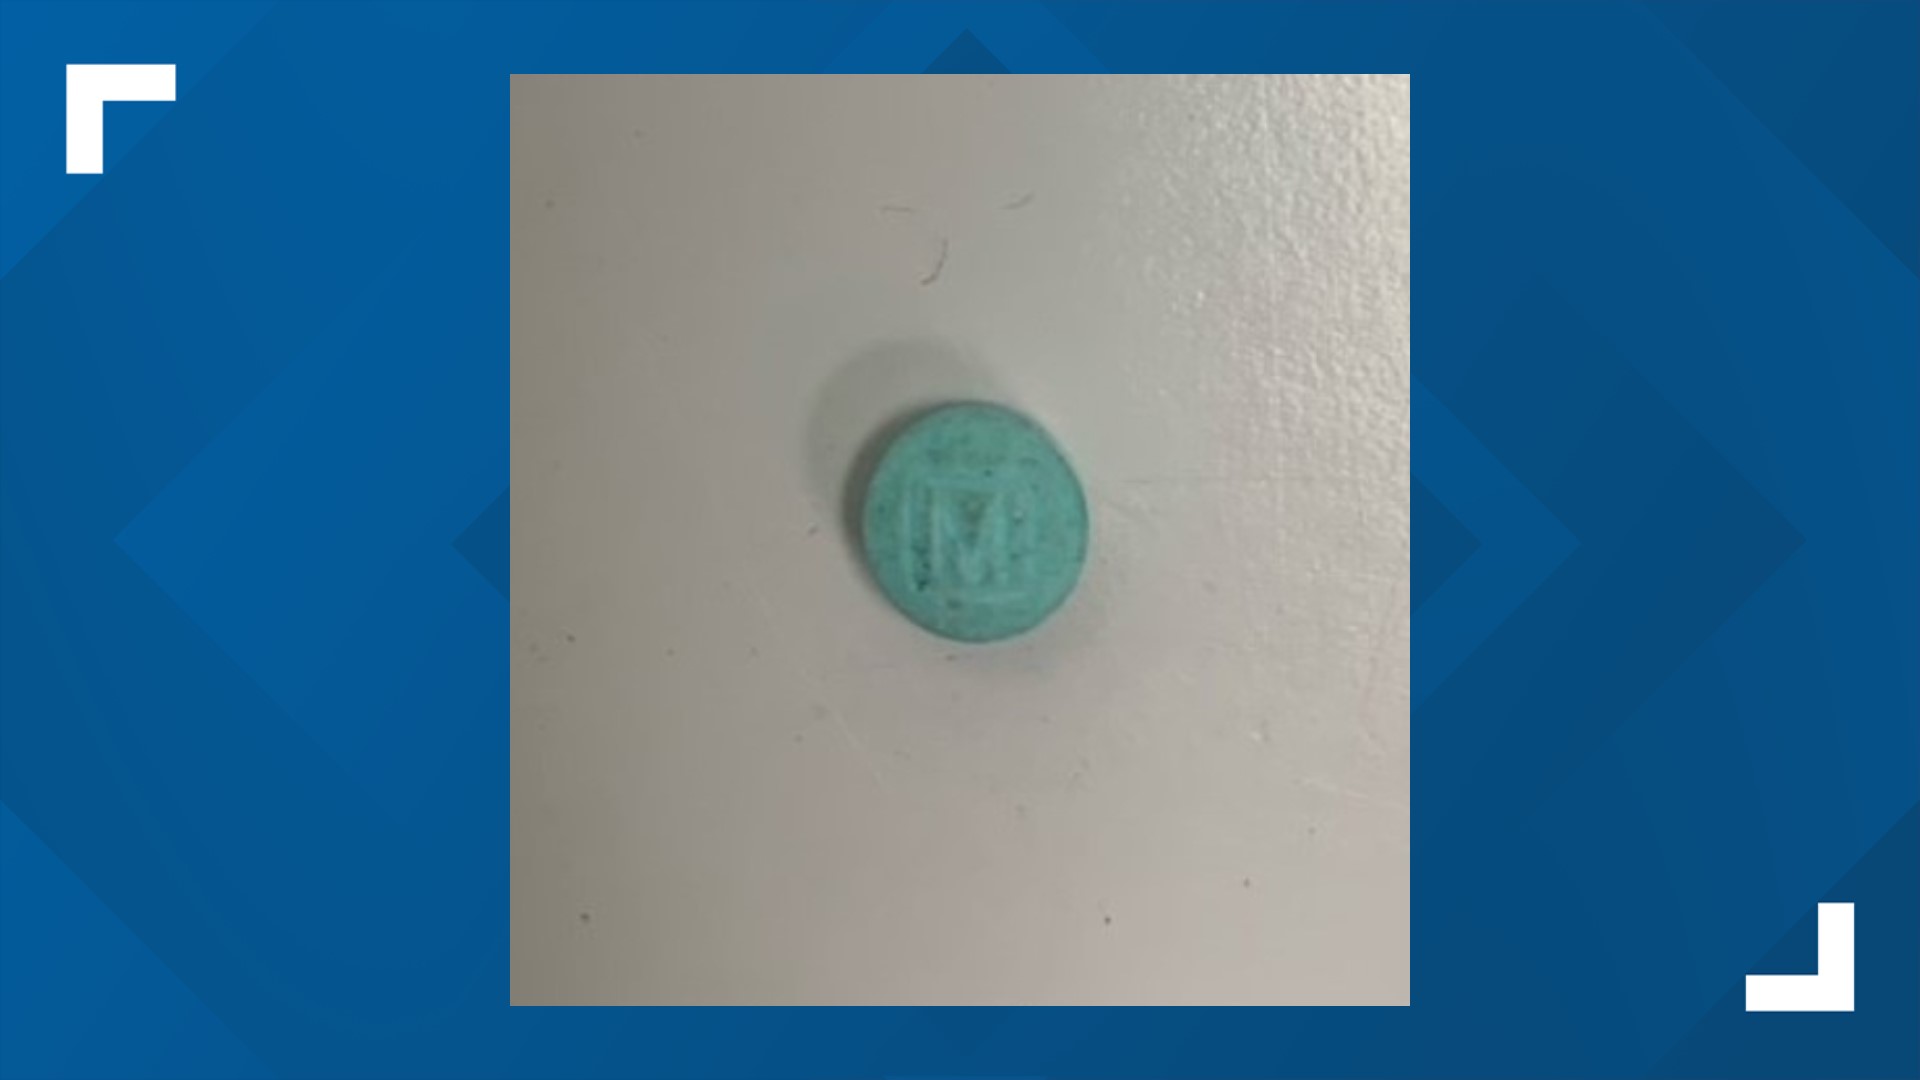 With recent cases of counterfeit pills laced with fentanyl, the Prince William County commonwealth's attorney says more mental health services are needed.